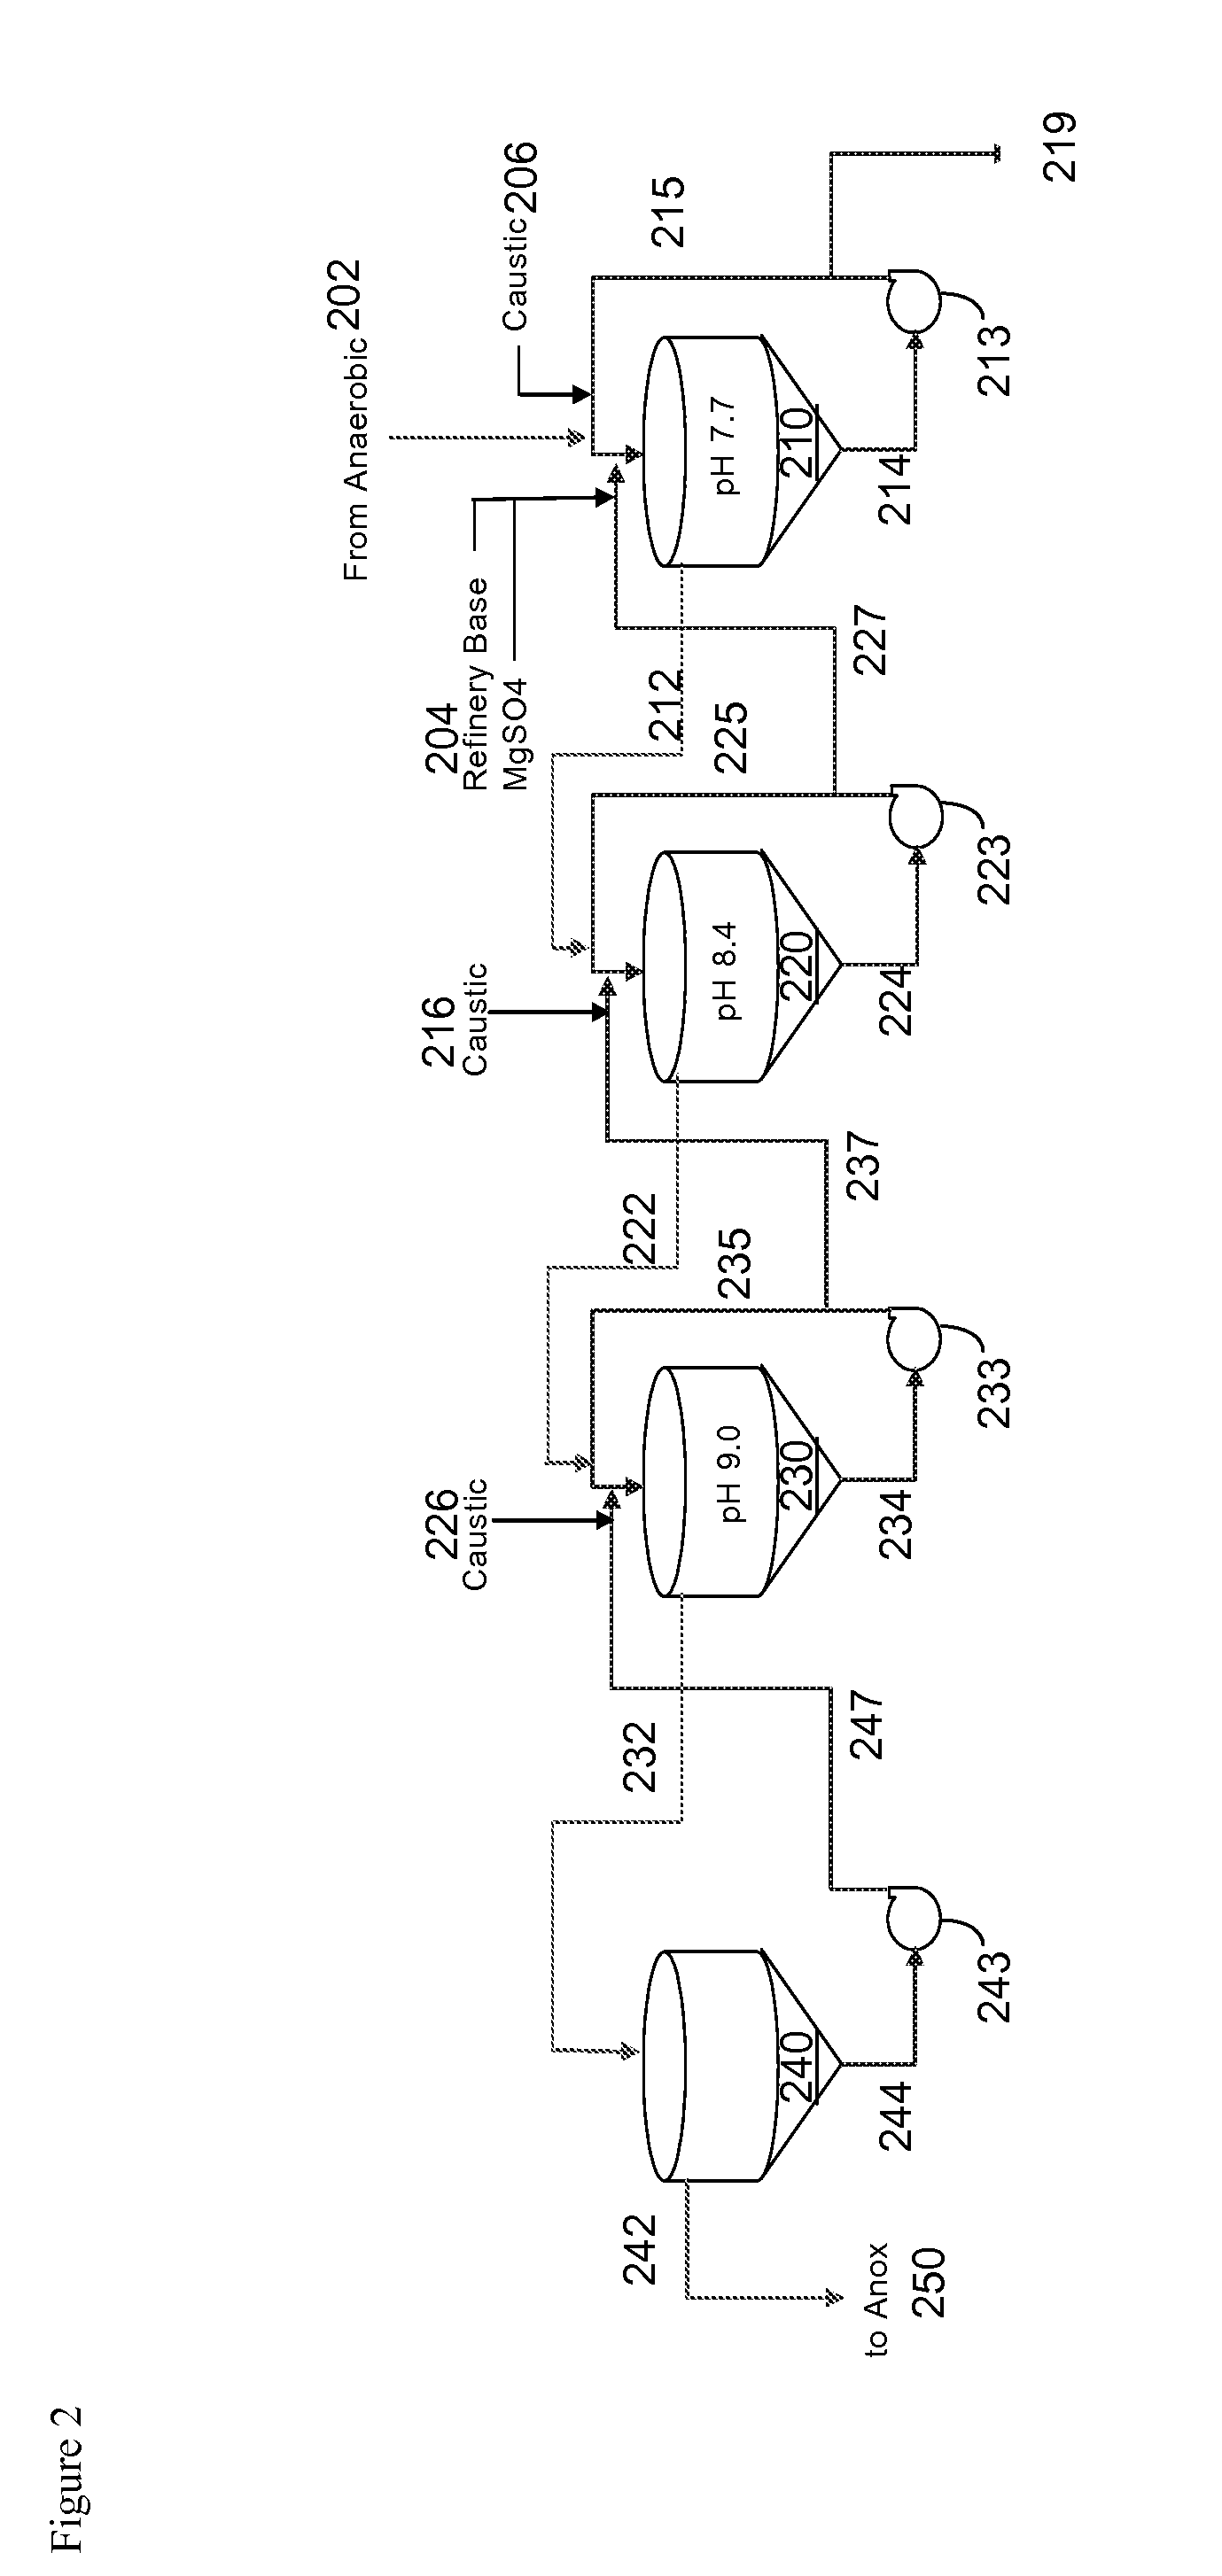 System and Process for Removal of Phosphorous and Ammonia from Aqueous Streams